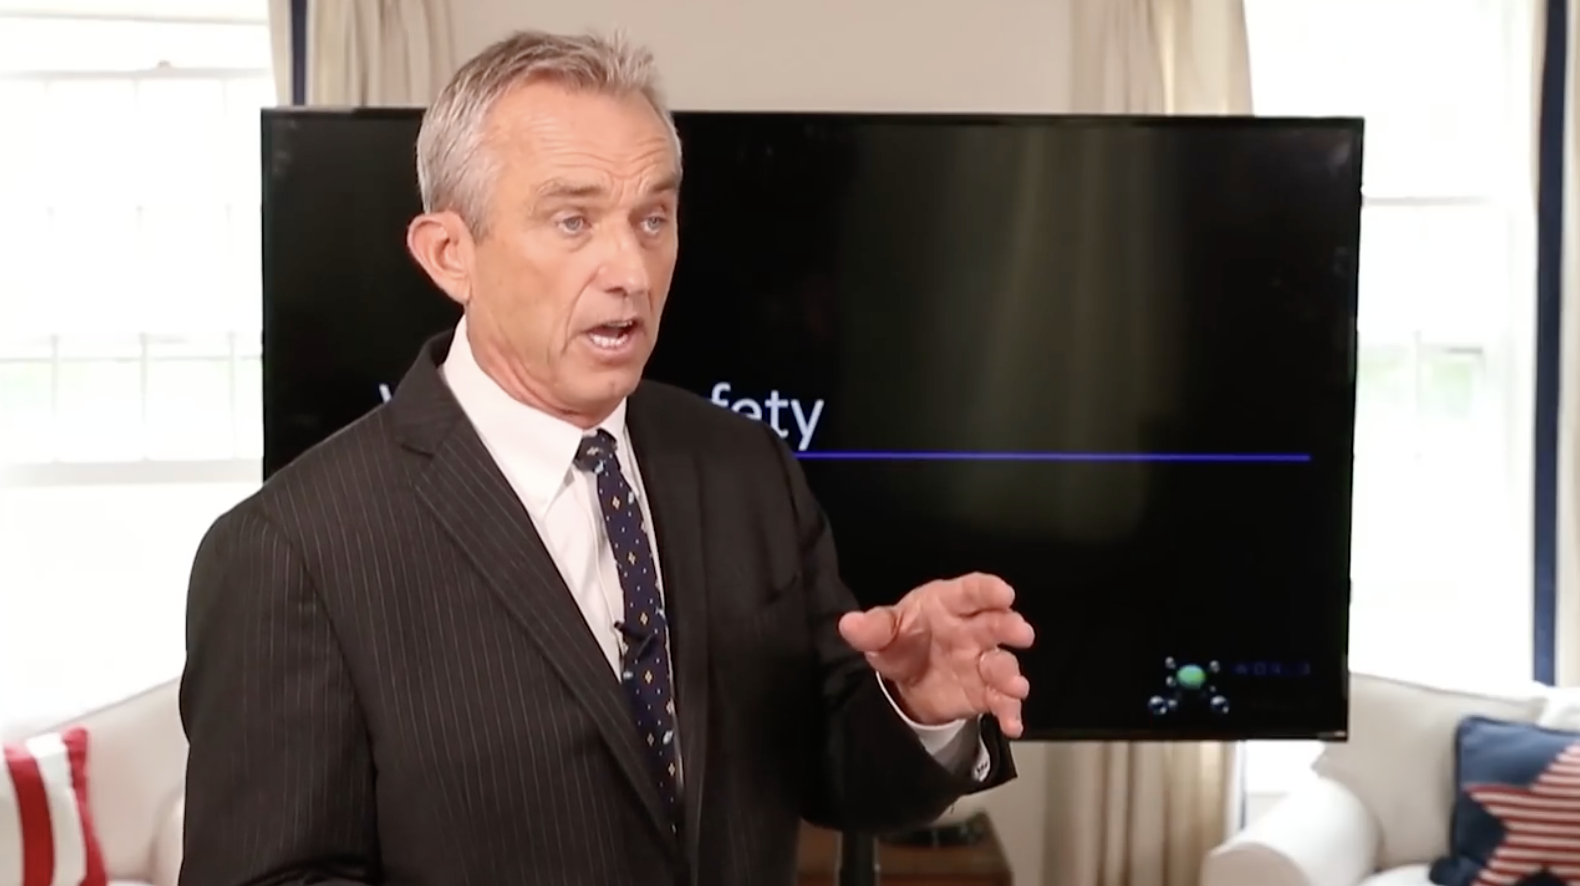 Image: Robert Kennedy Jr. launches first lawsuit of thousands against Monsanto alleging herbicide Roundup causes non-Hodgkin’s lymphoma